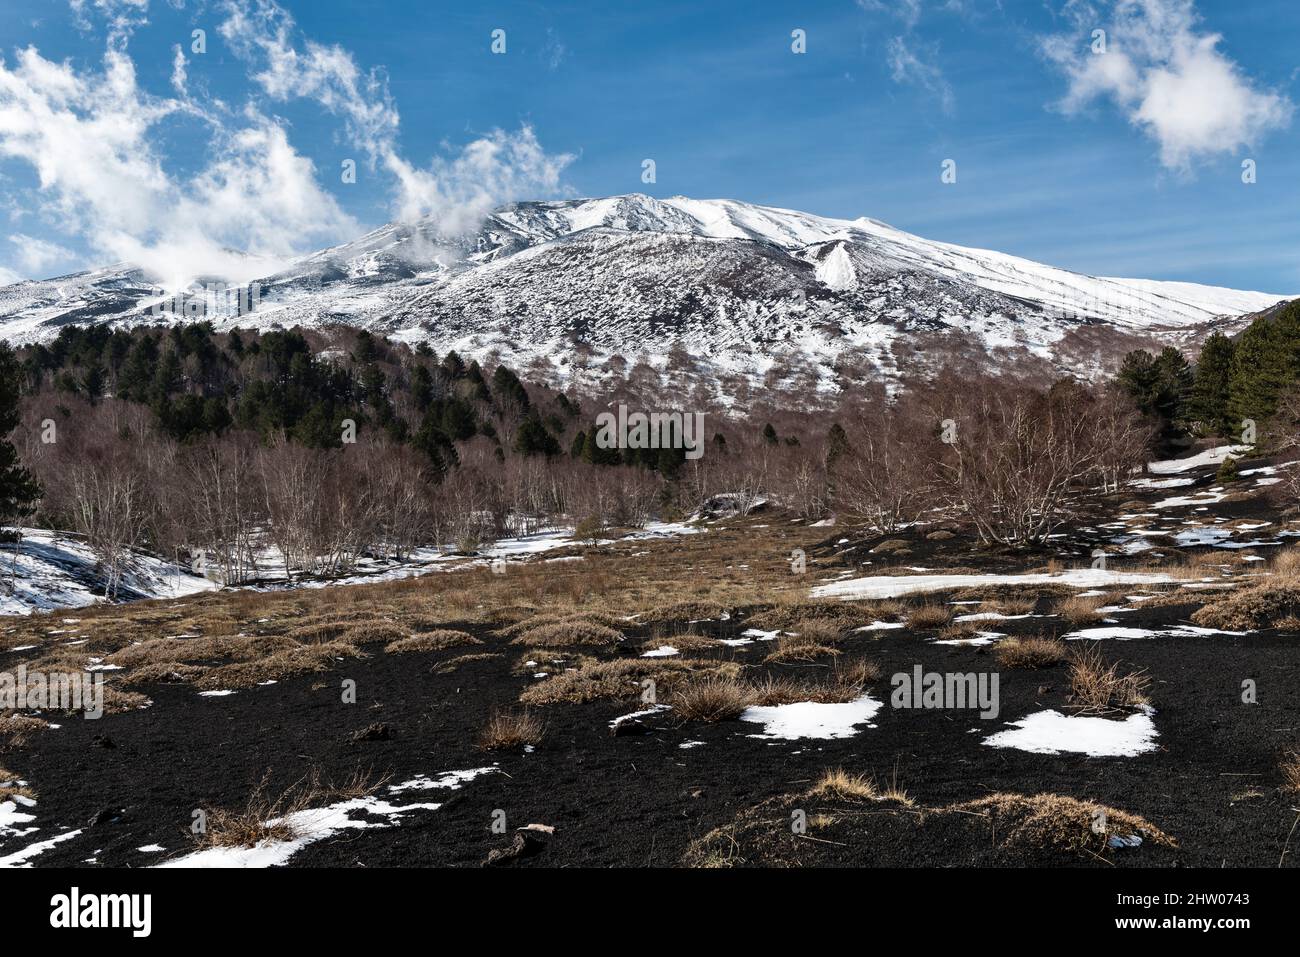 The summit of Mount Etna (3357m), Sicily, Italy, seen in late winter Stock Photo